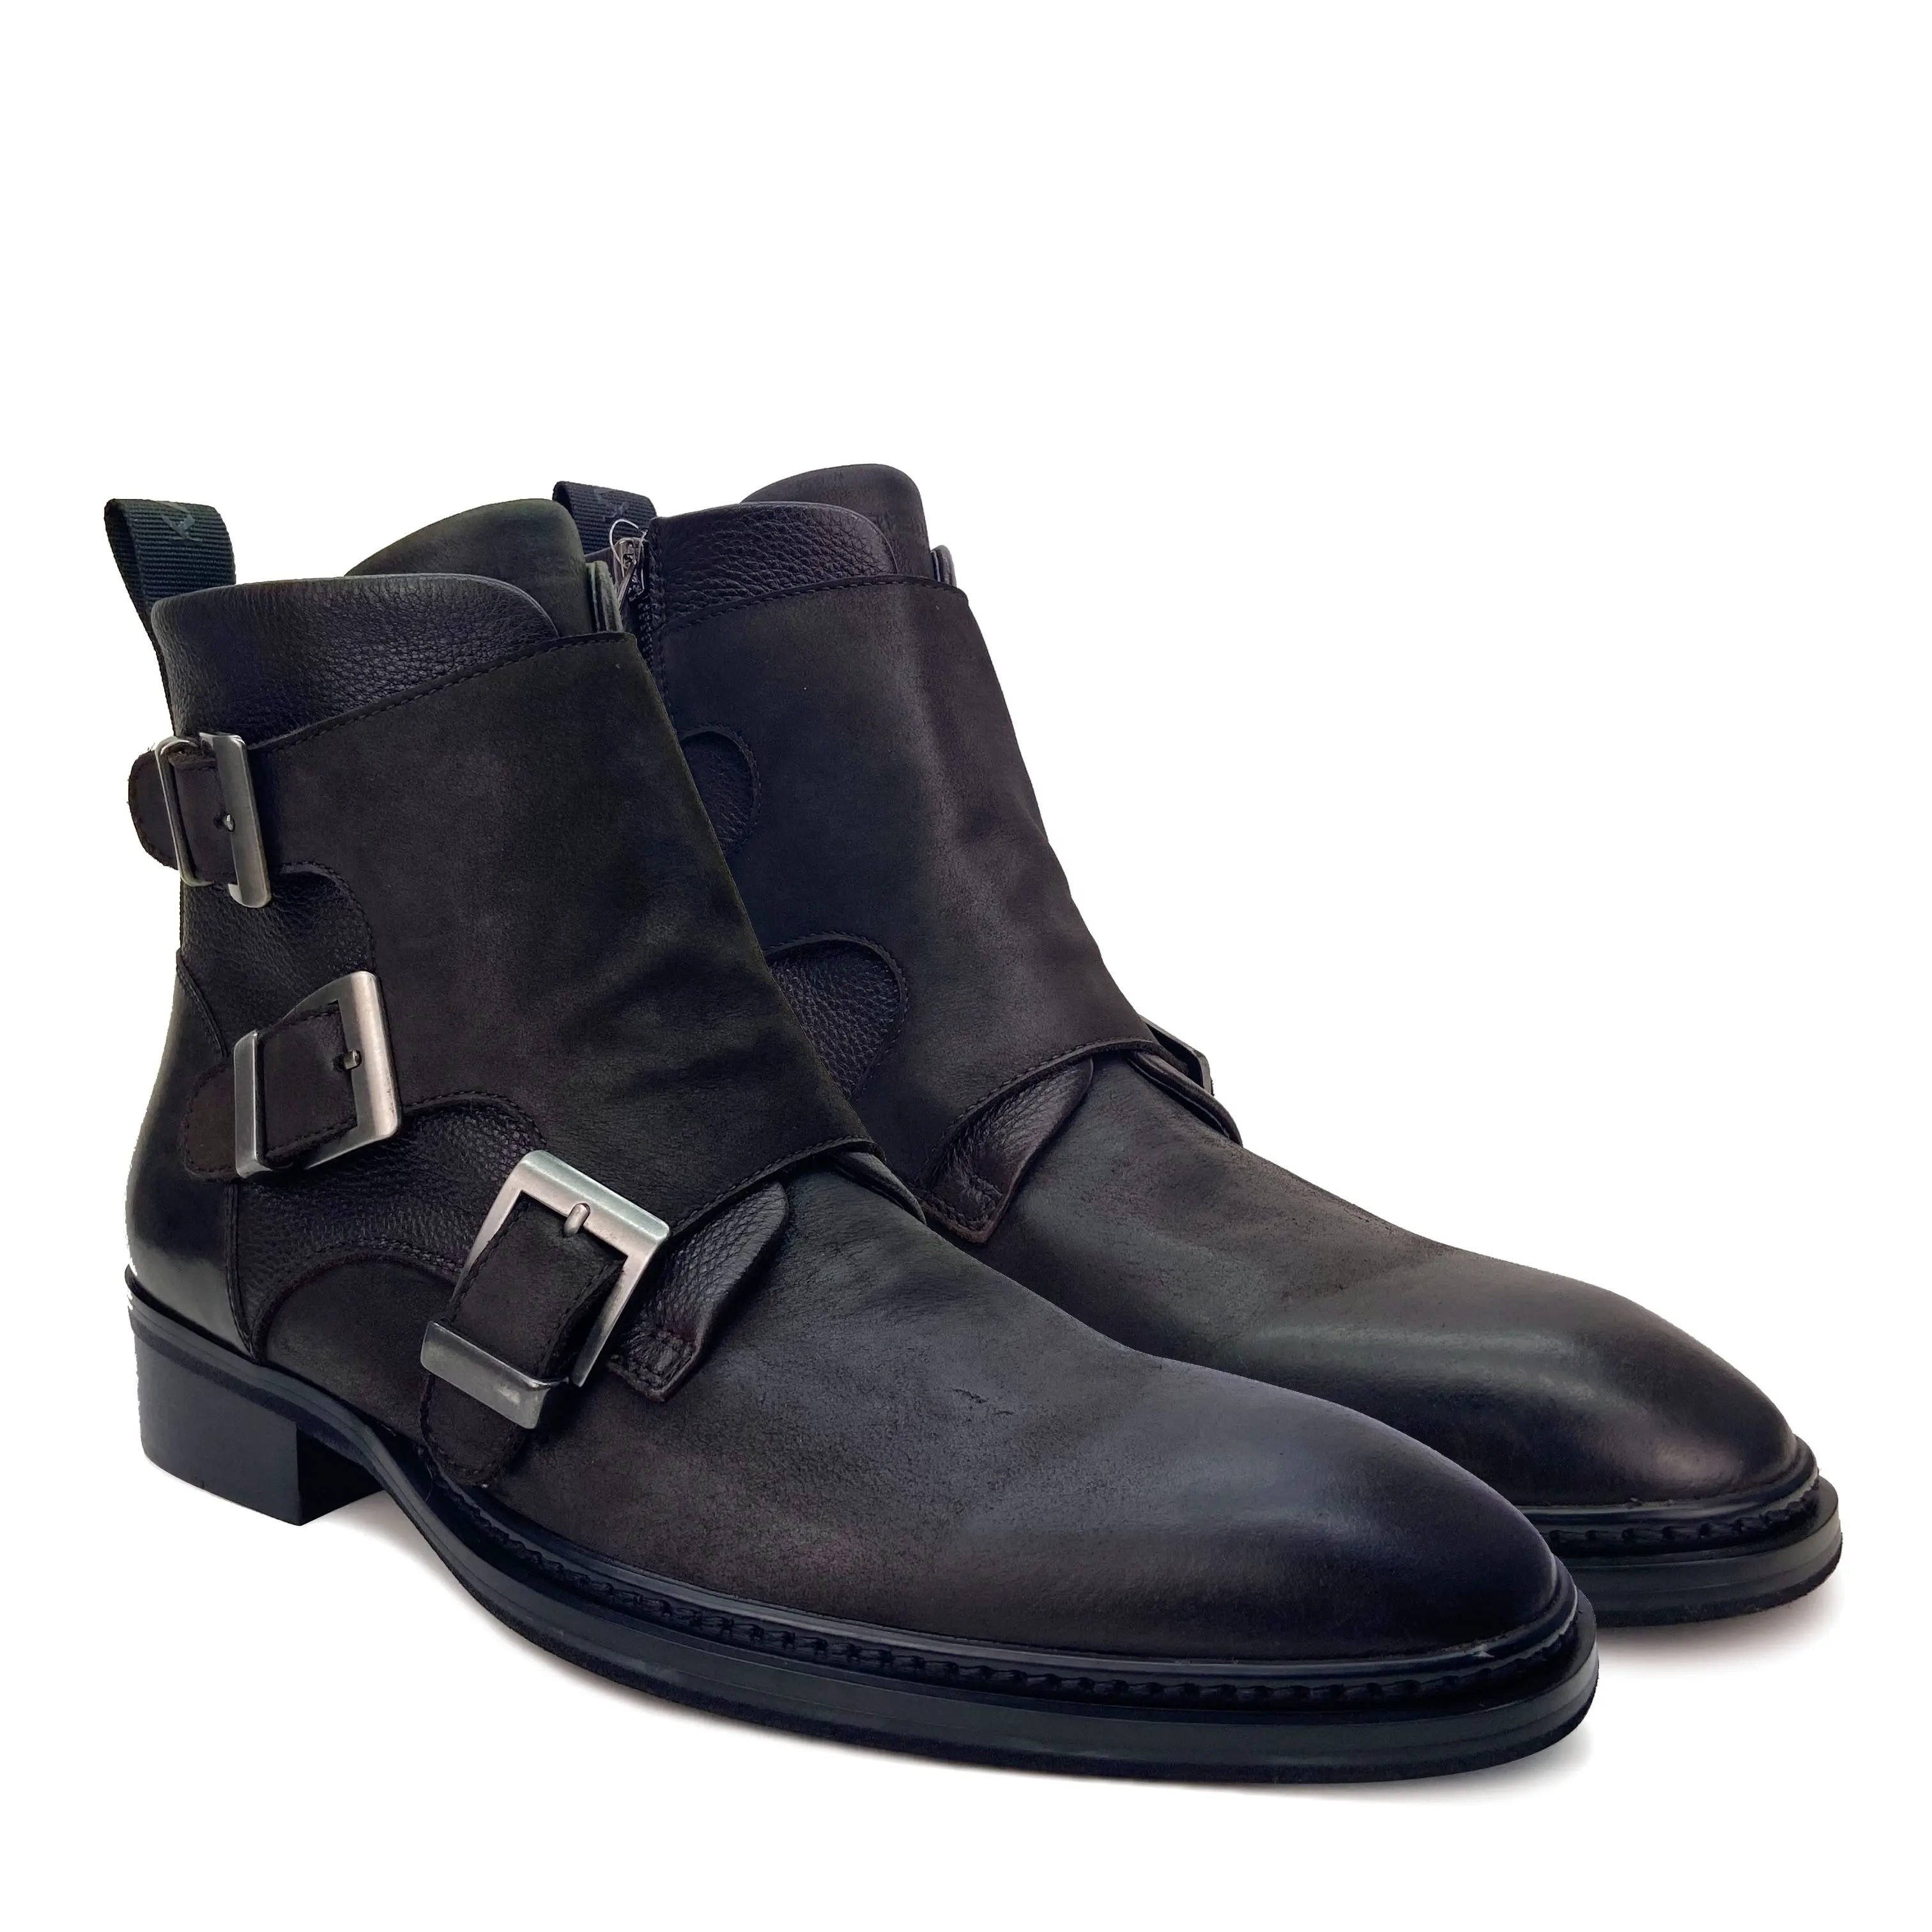 Boots Men's Male boutique small order casual dress boots custom made buckle shoes